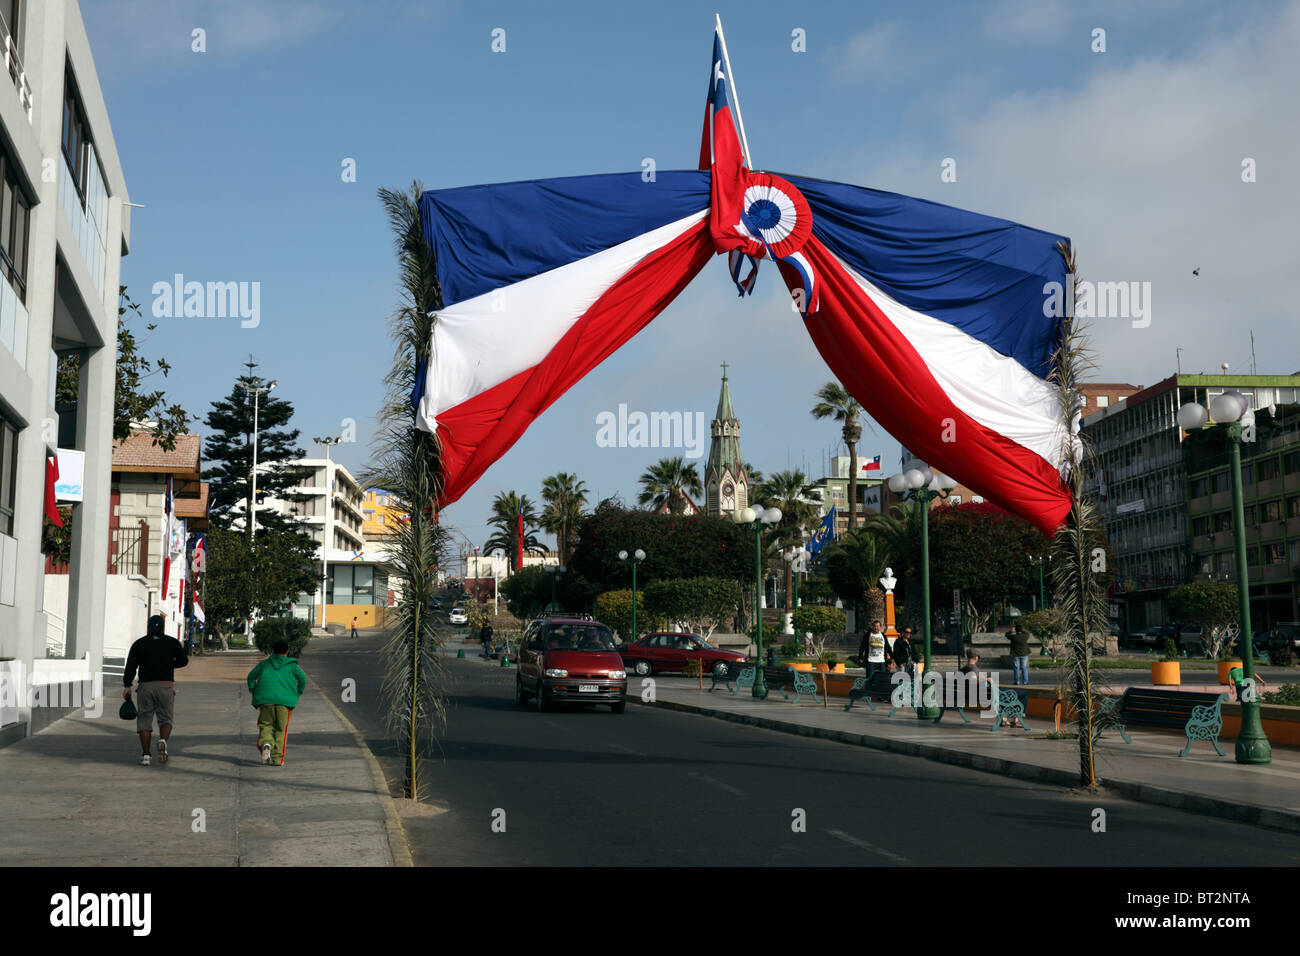 Chilean flags in Plaza Colon for the bicentenary of the establishment of the First Government Junta of Chile on 18th September 1810, Arica, Chile Stock Photo